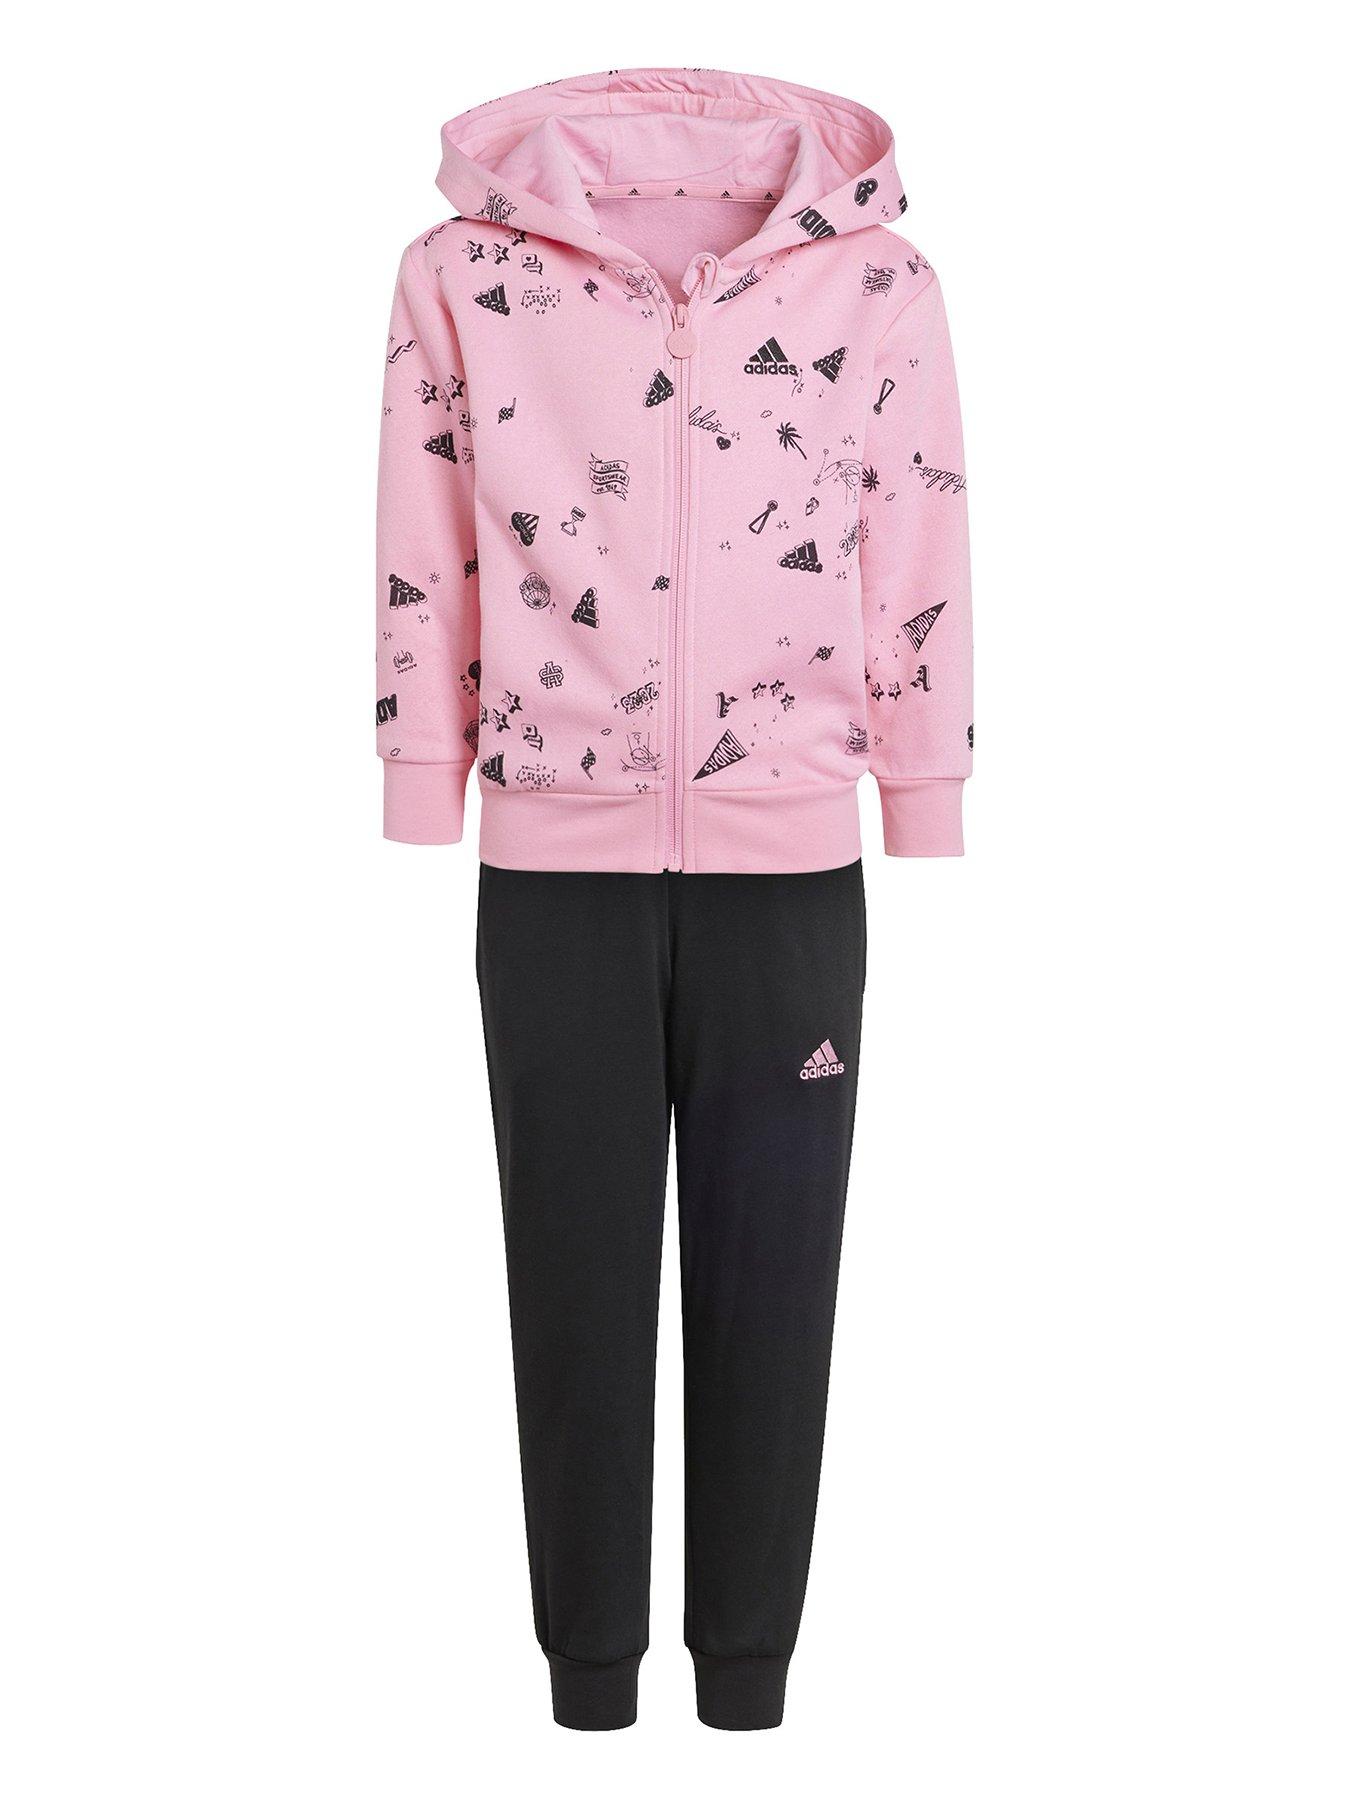 | | Pink | Girls Adidas baby & Child clothes